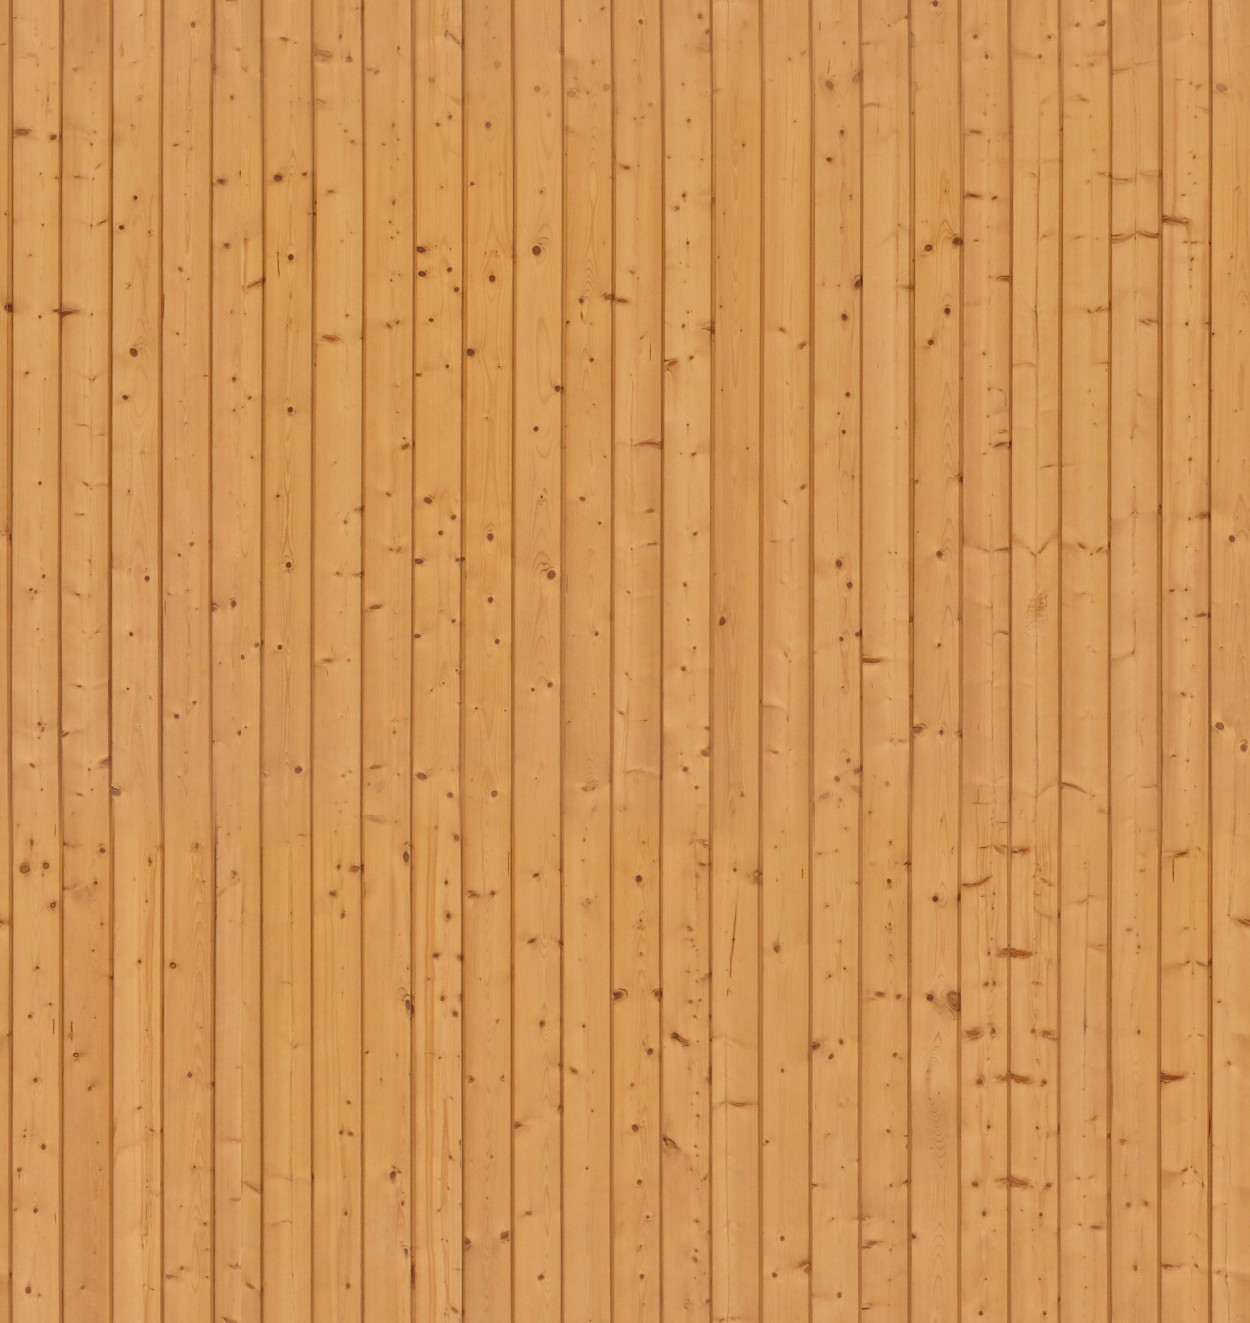 A seamless light timber boards texture for use in architectural drawings and 3D models